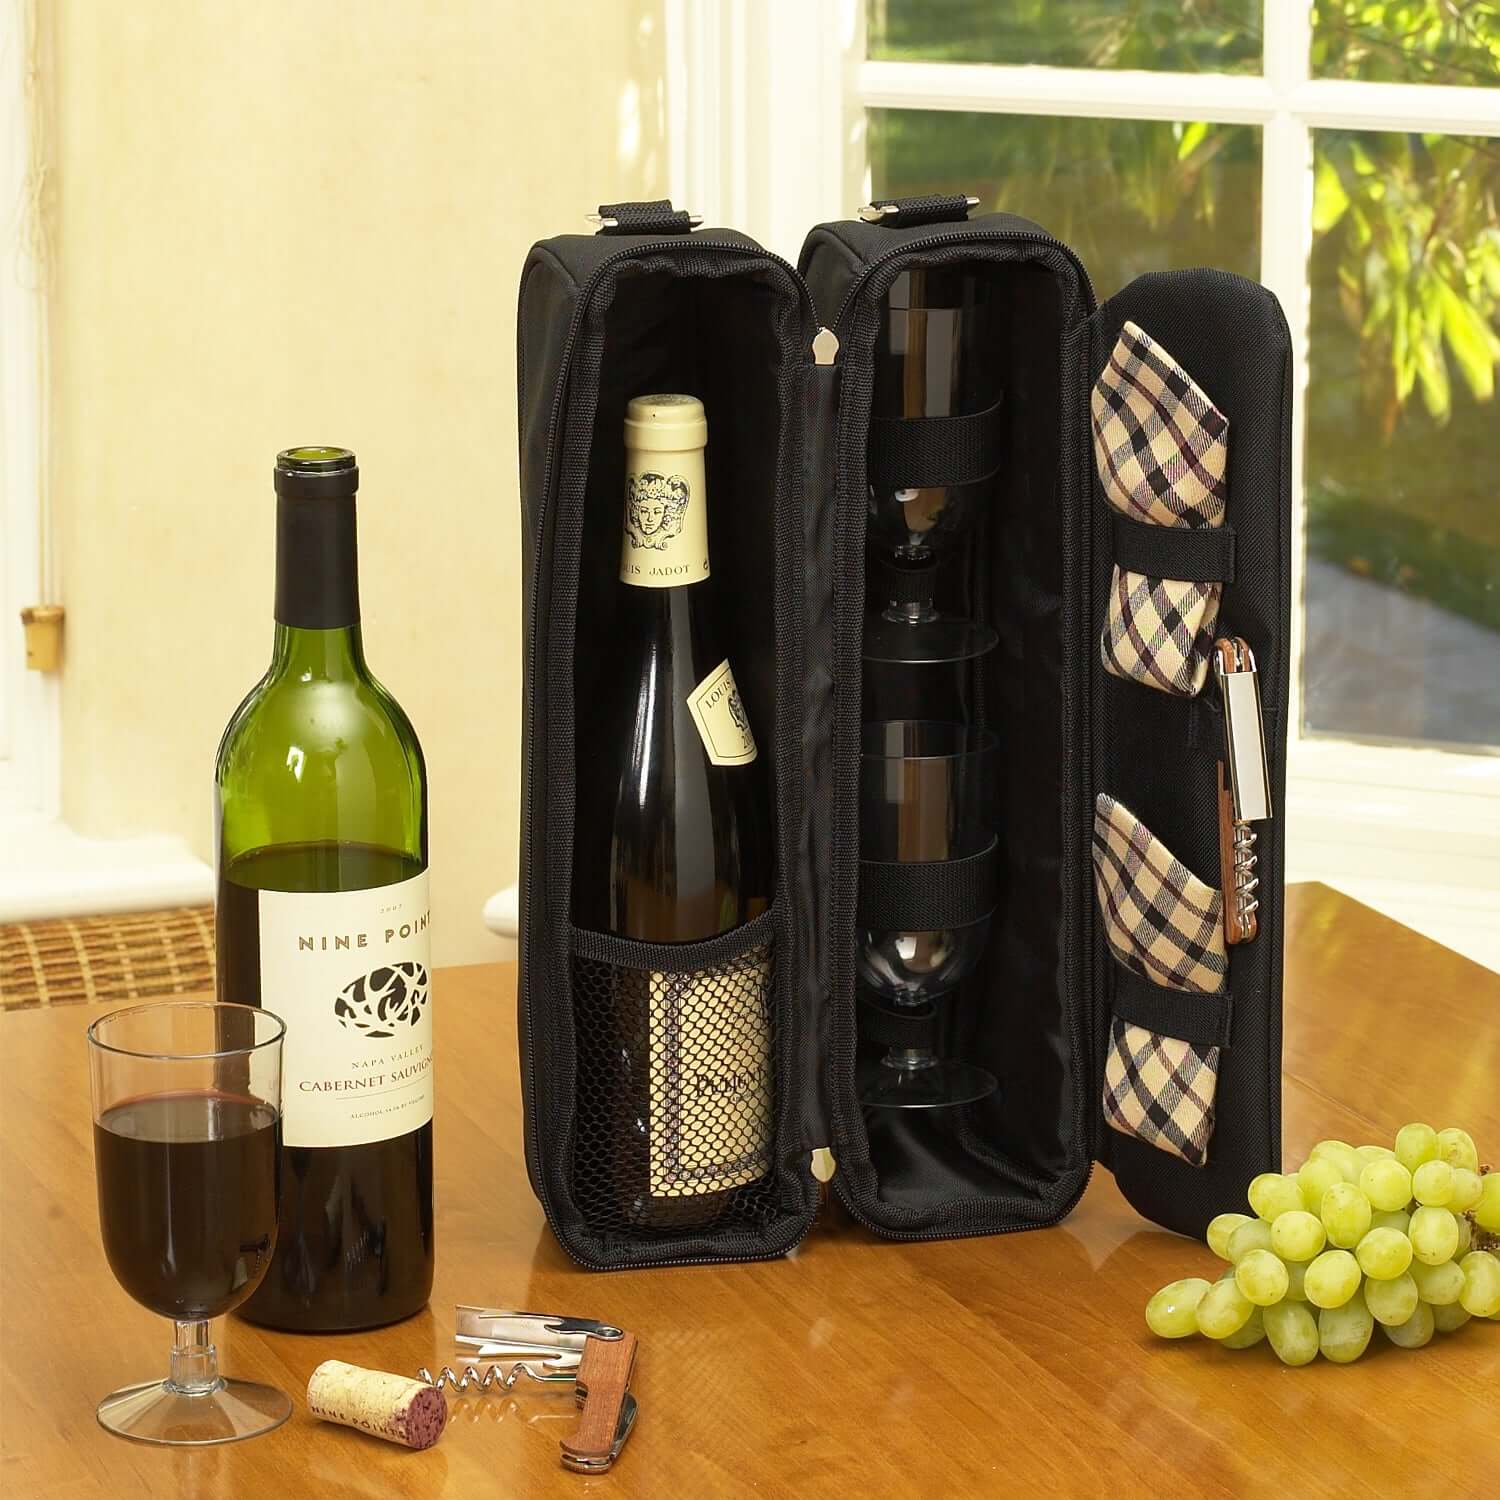 Picnic at Ascot - Deluxe Vienna Travel Coffee Tote for 2 - Black